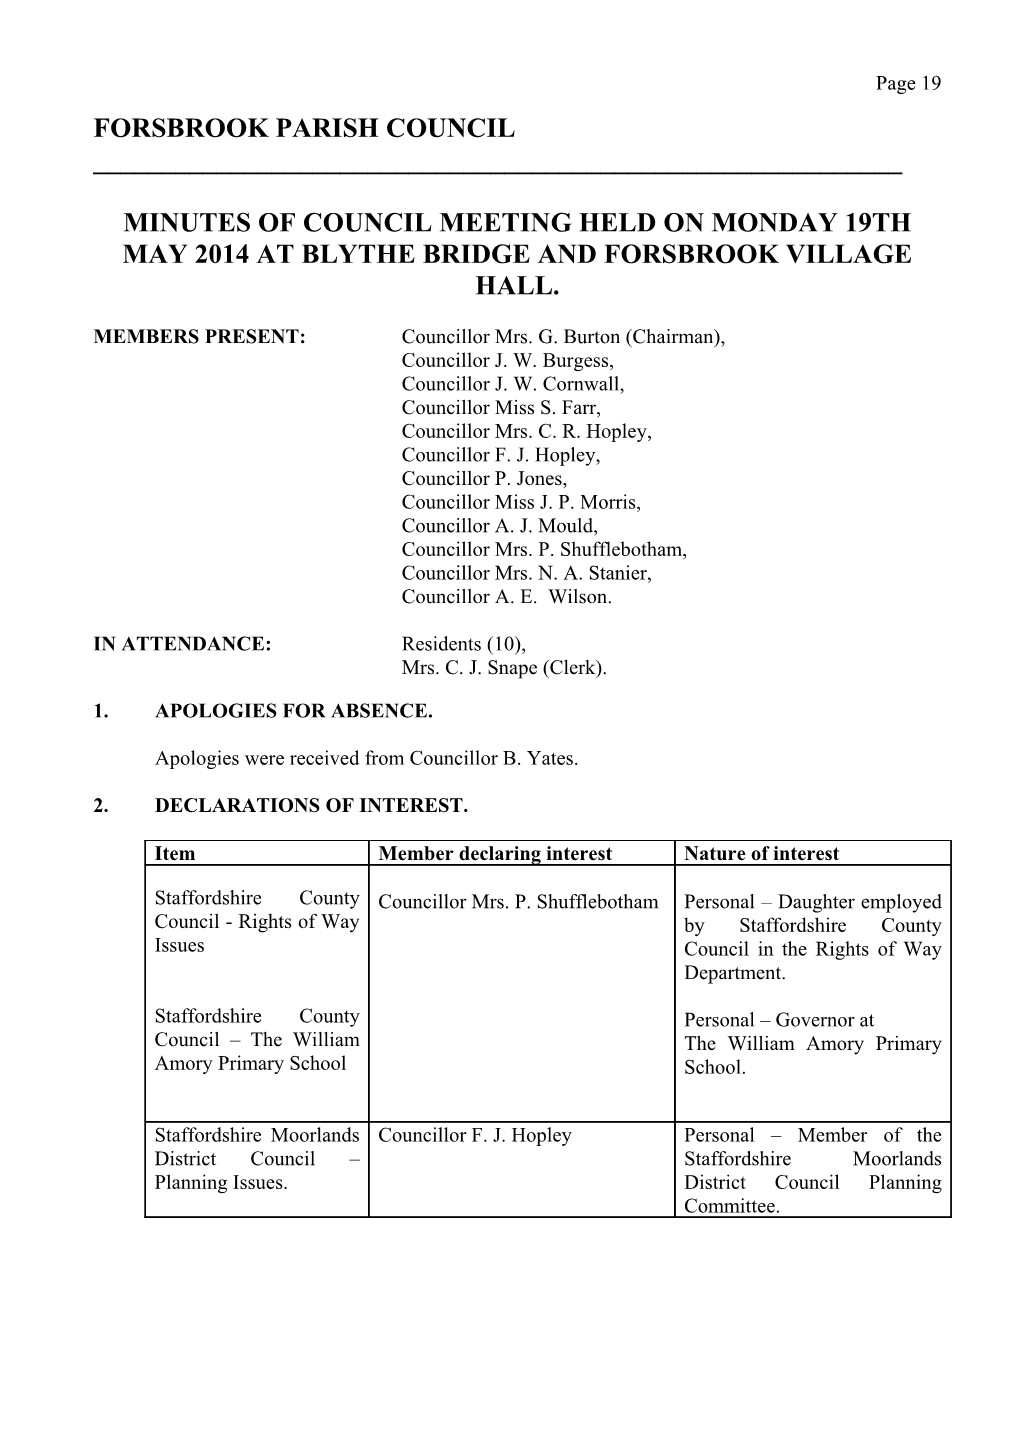 Minutes of Council Meeting Held on Monday 19Th May 2014 at Blythe Bridge and Forsbrook Village Hall